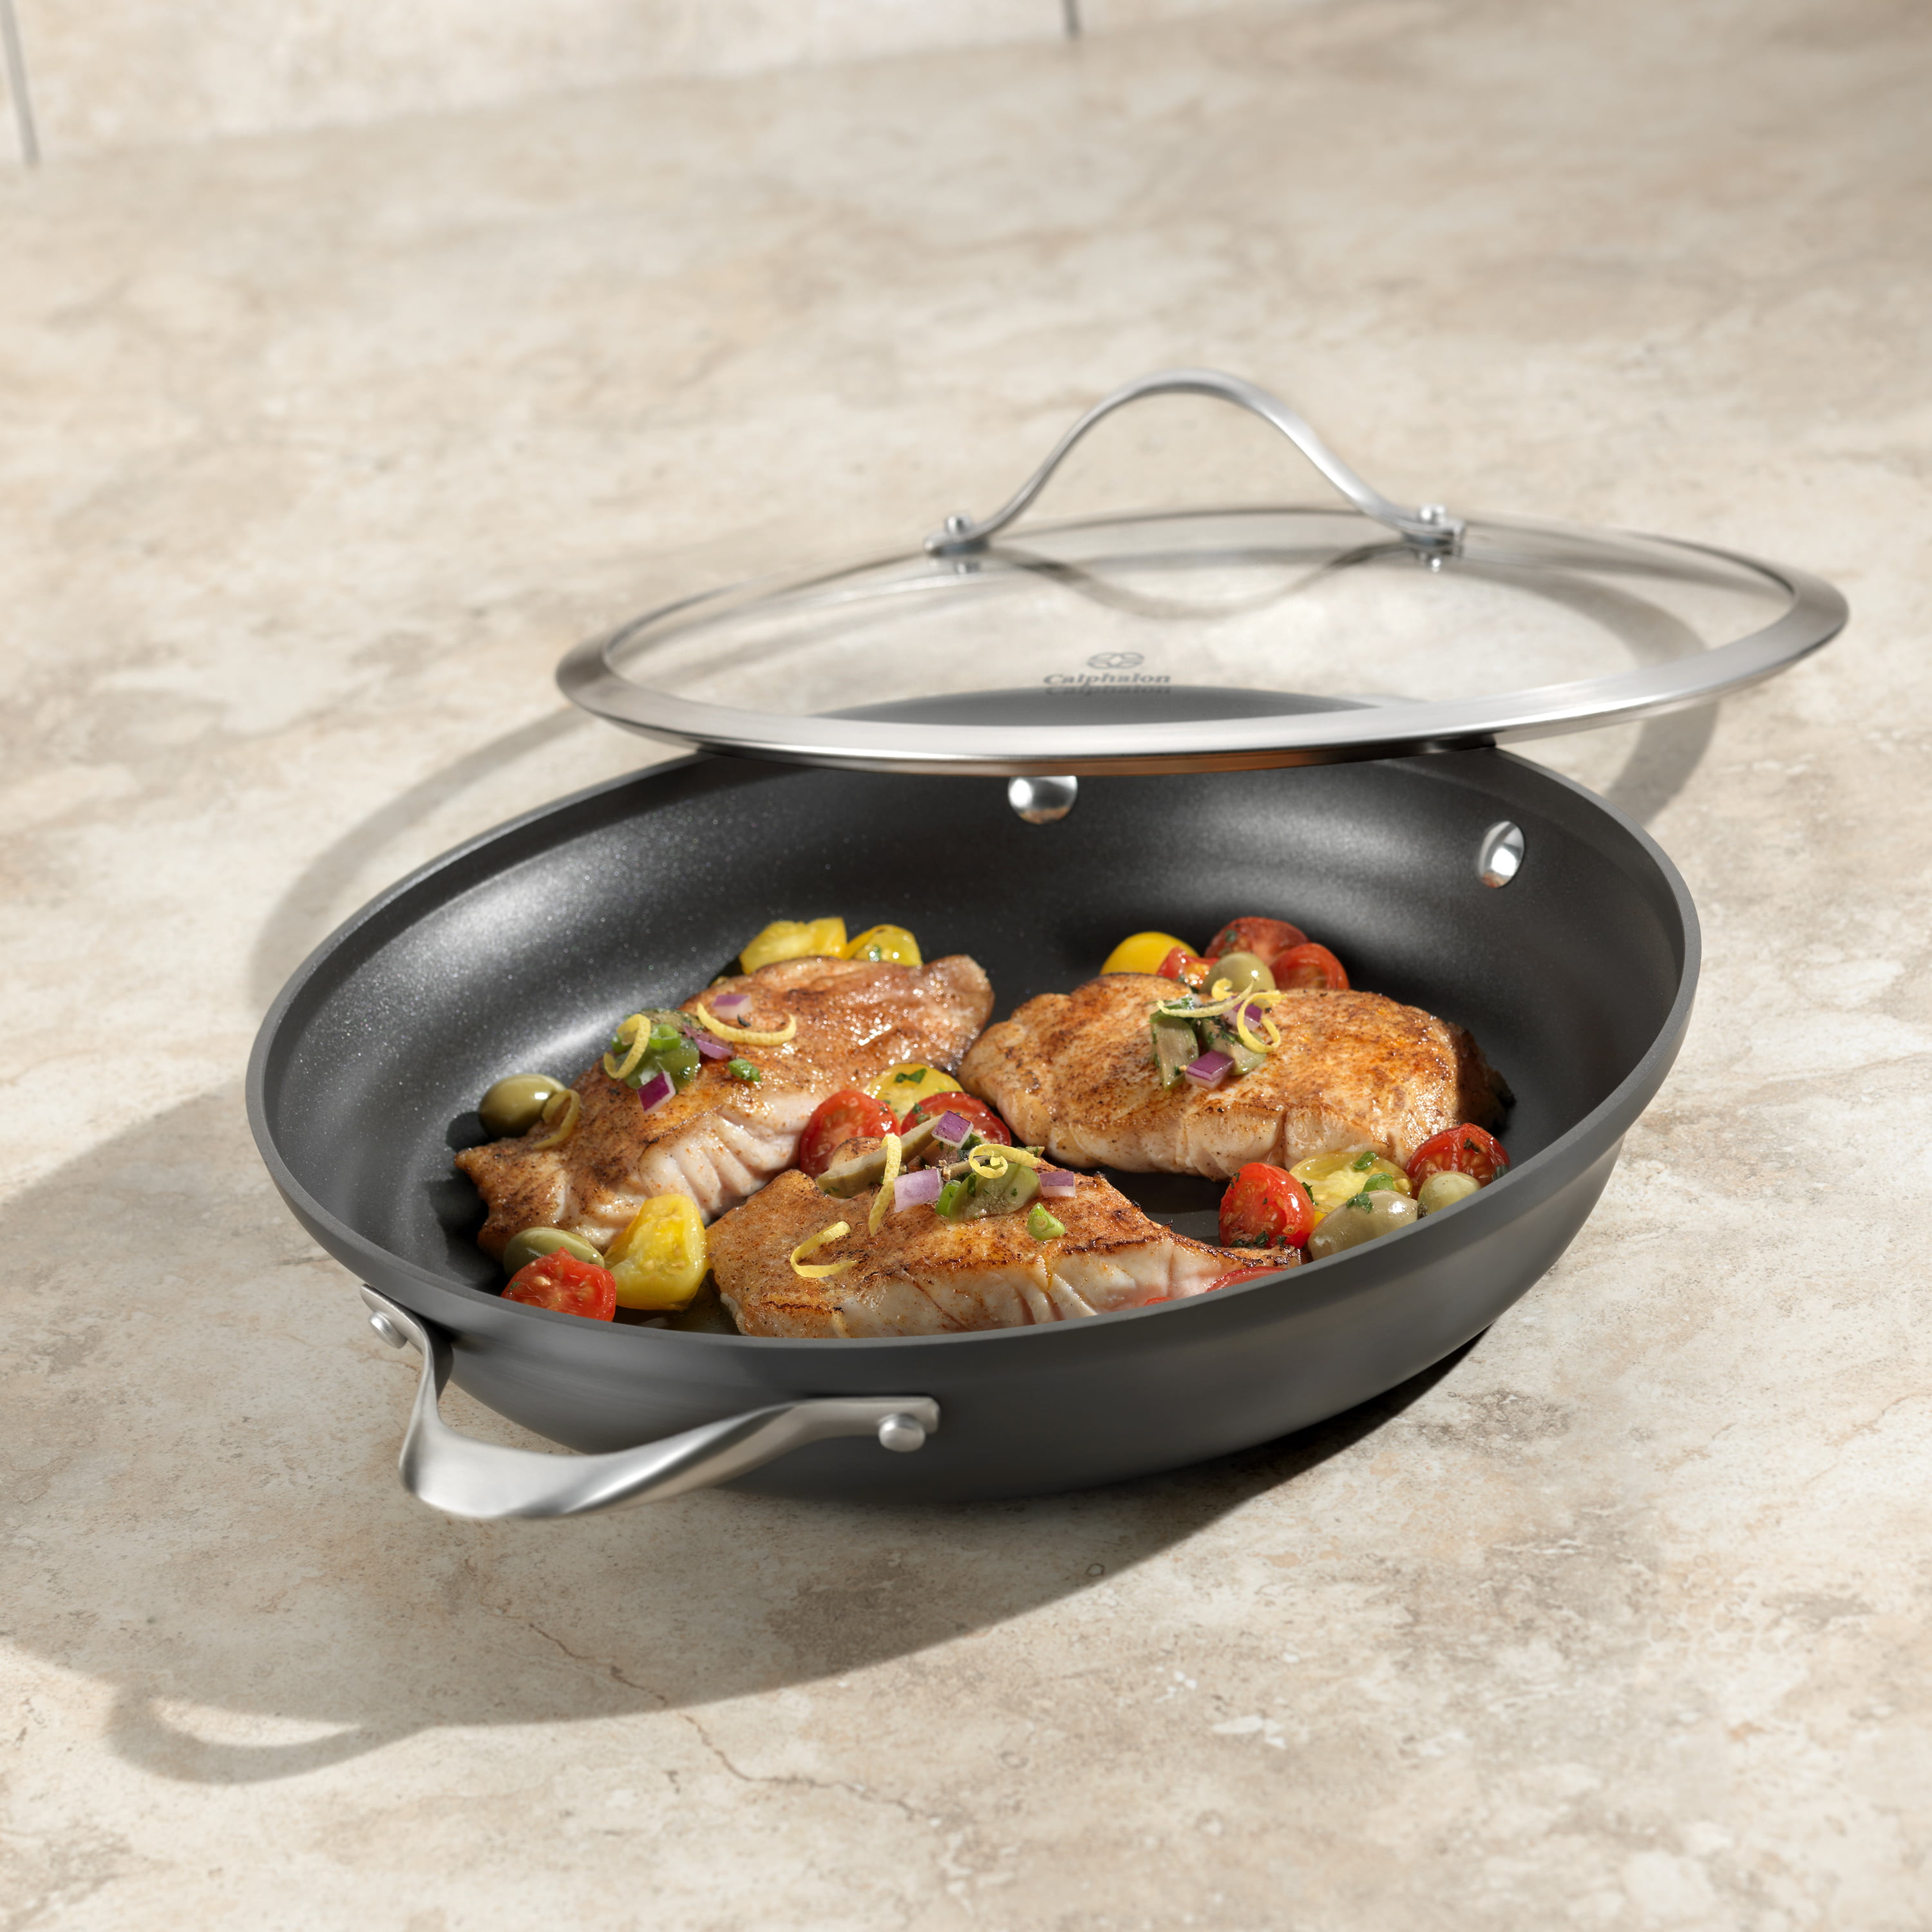 Calphalon Signature Nonstick 12-Inch Everyday Pan with Cover 